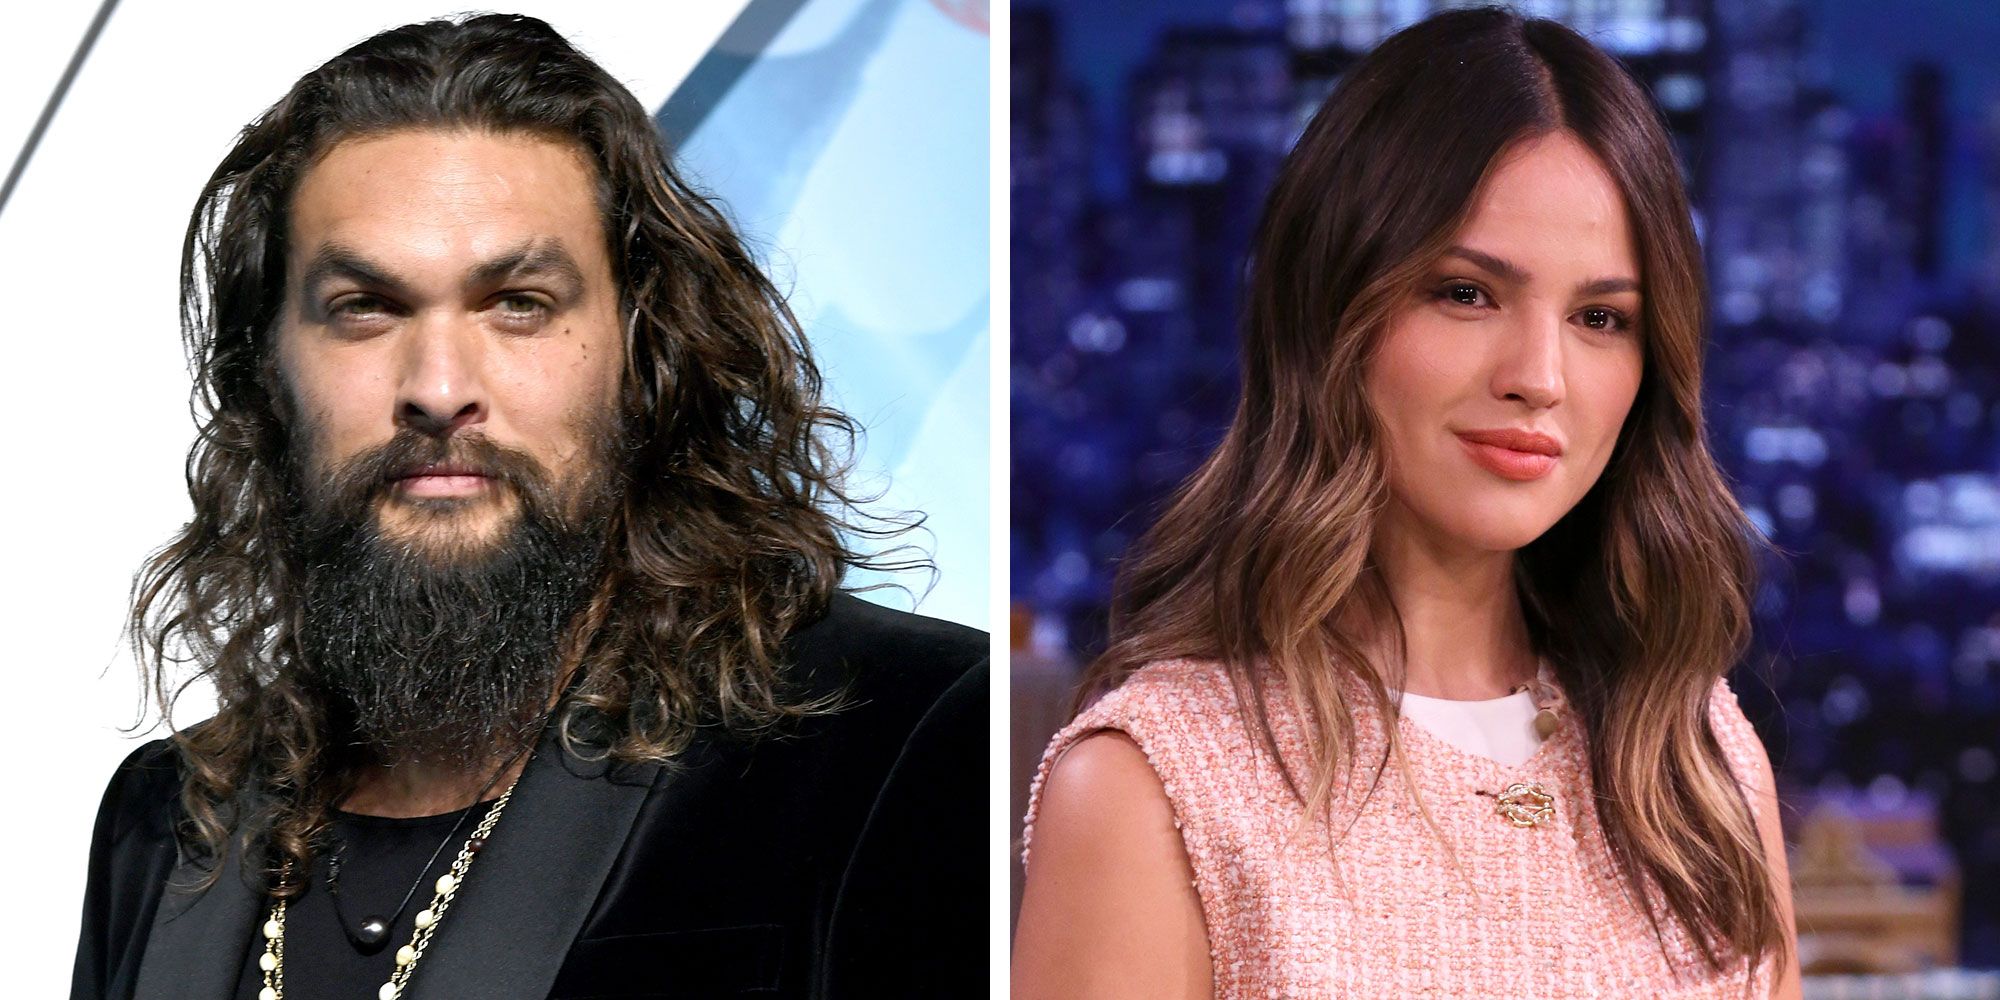 Jason Momoa is on the left, wearing a black outfit and sporting wavy long hair, while Eiza is on the right, looking stunning in pink